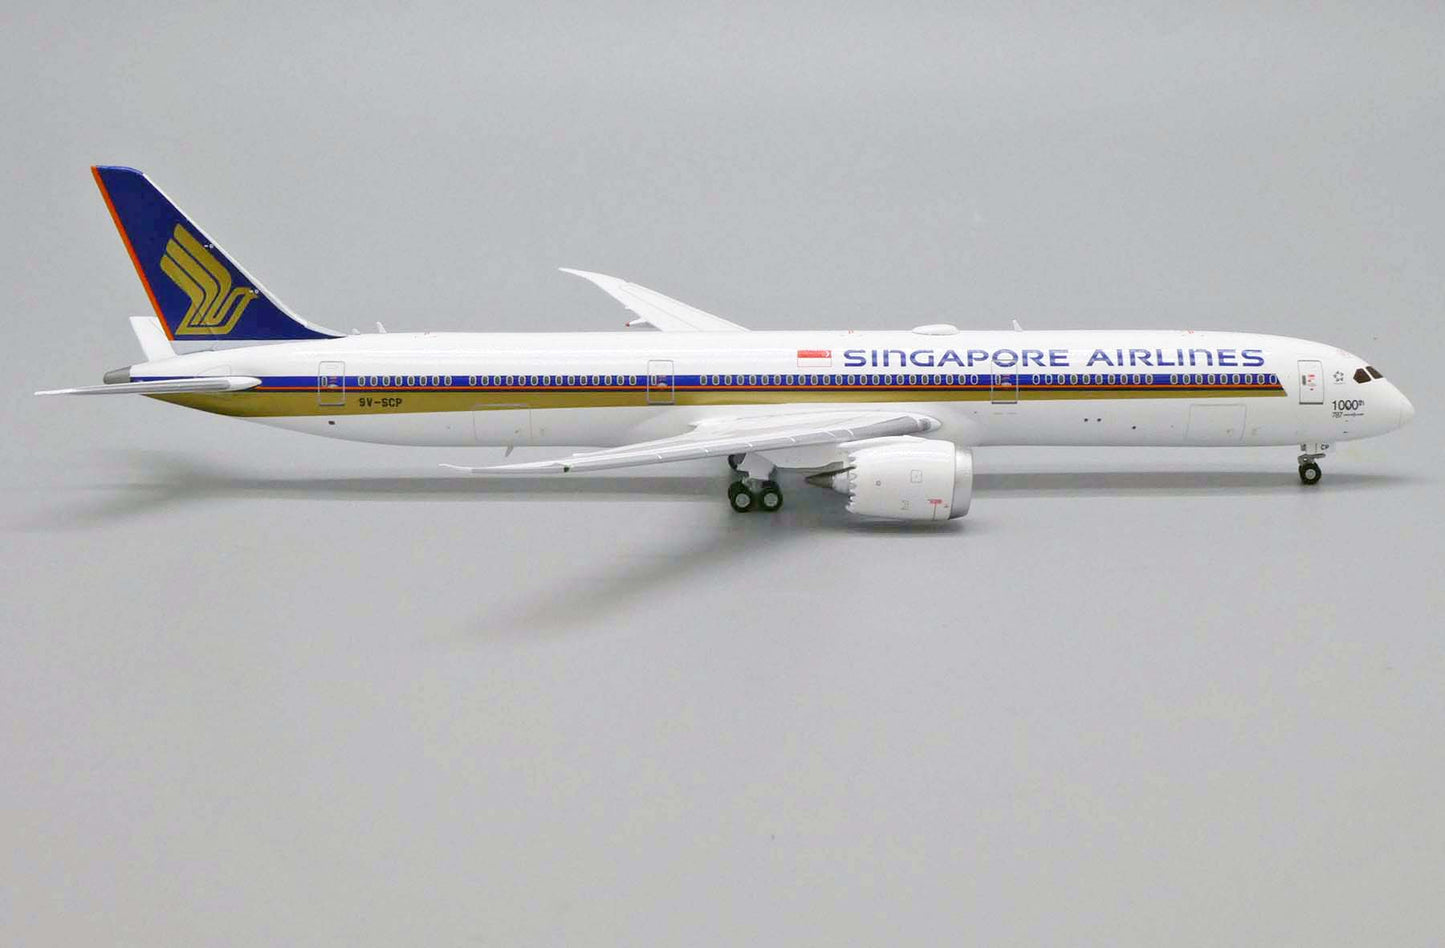 1:400 JC Wings Singapore Airlines Boeing 787-10 "1,000 Sticker" 9V-SCP EW478X003